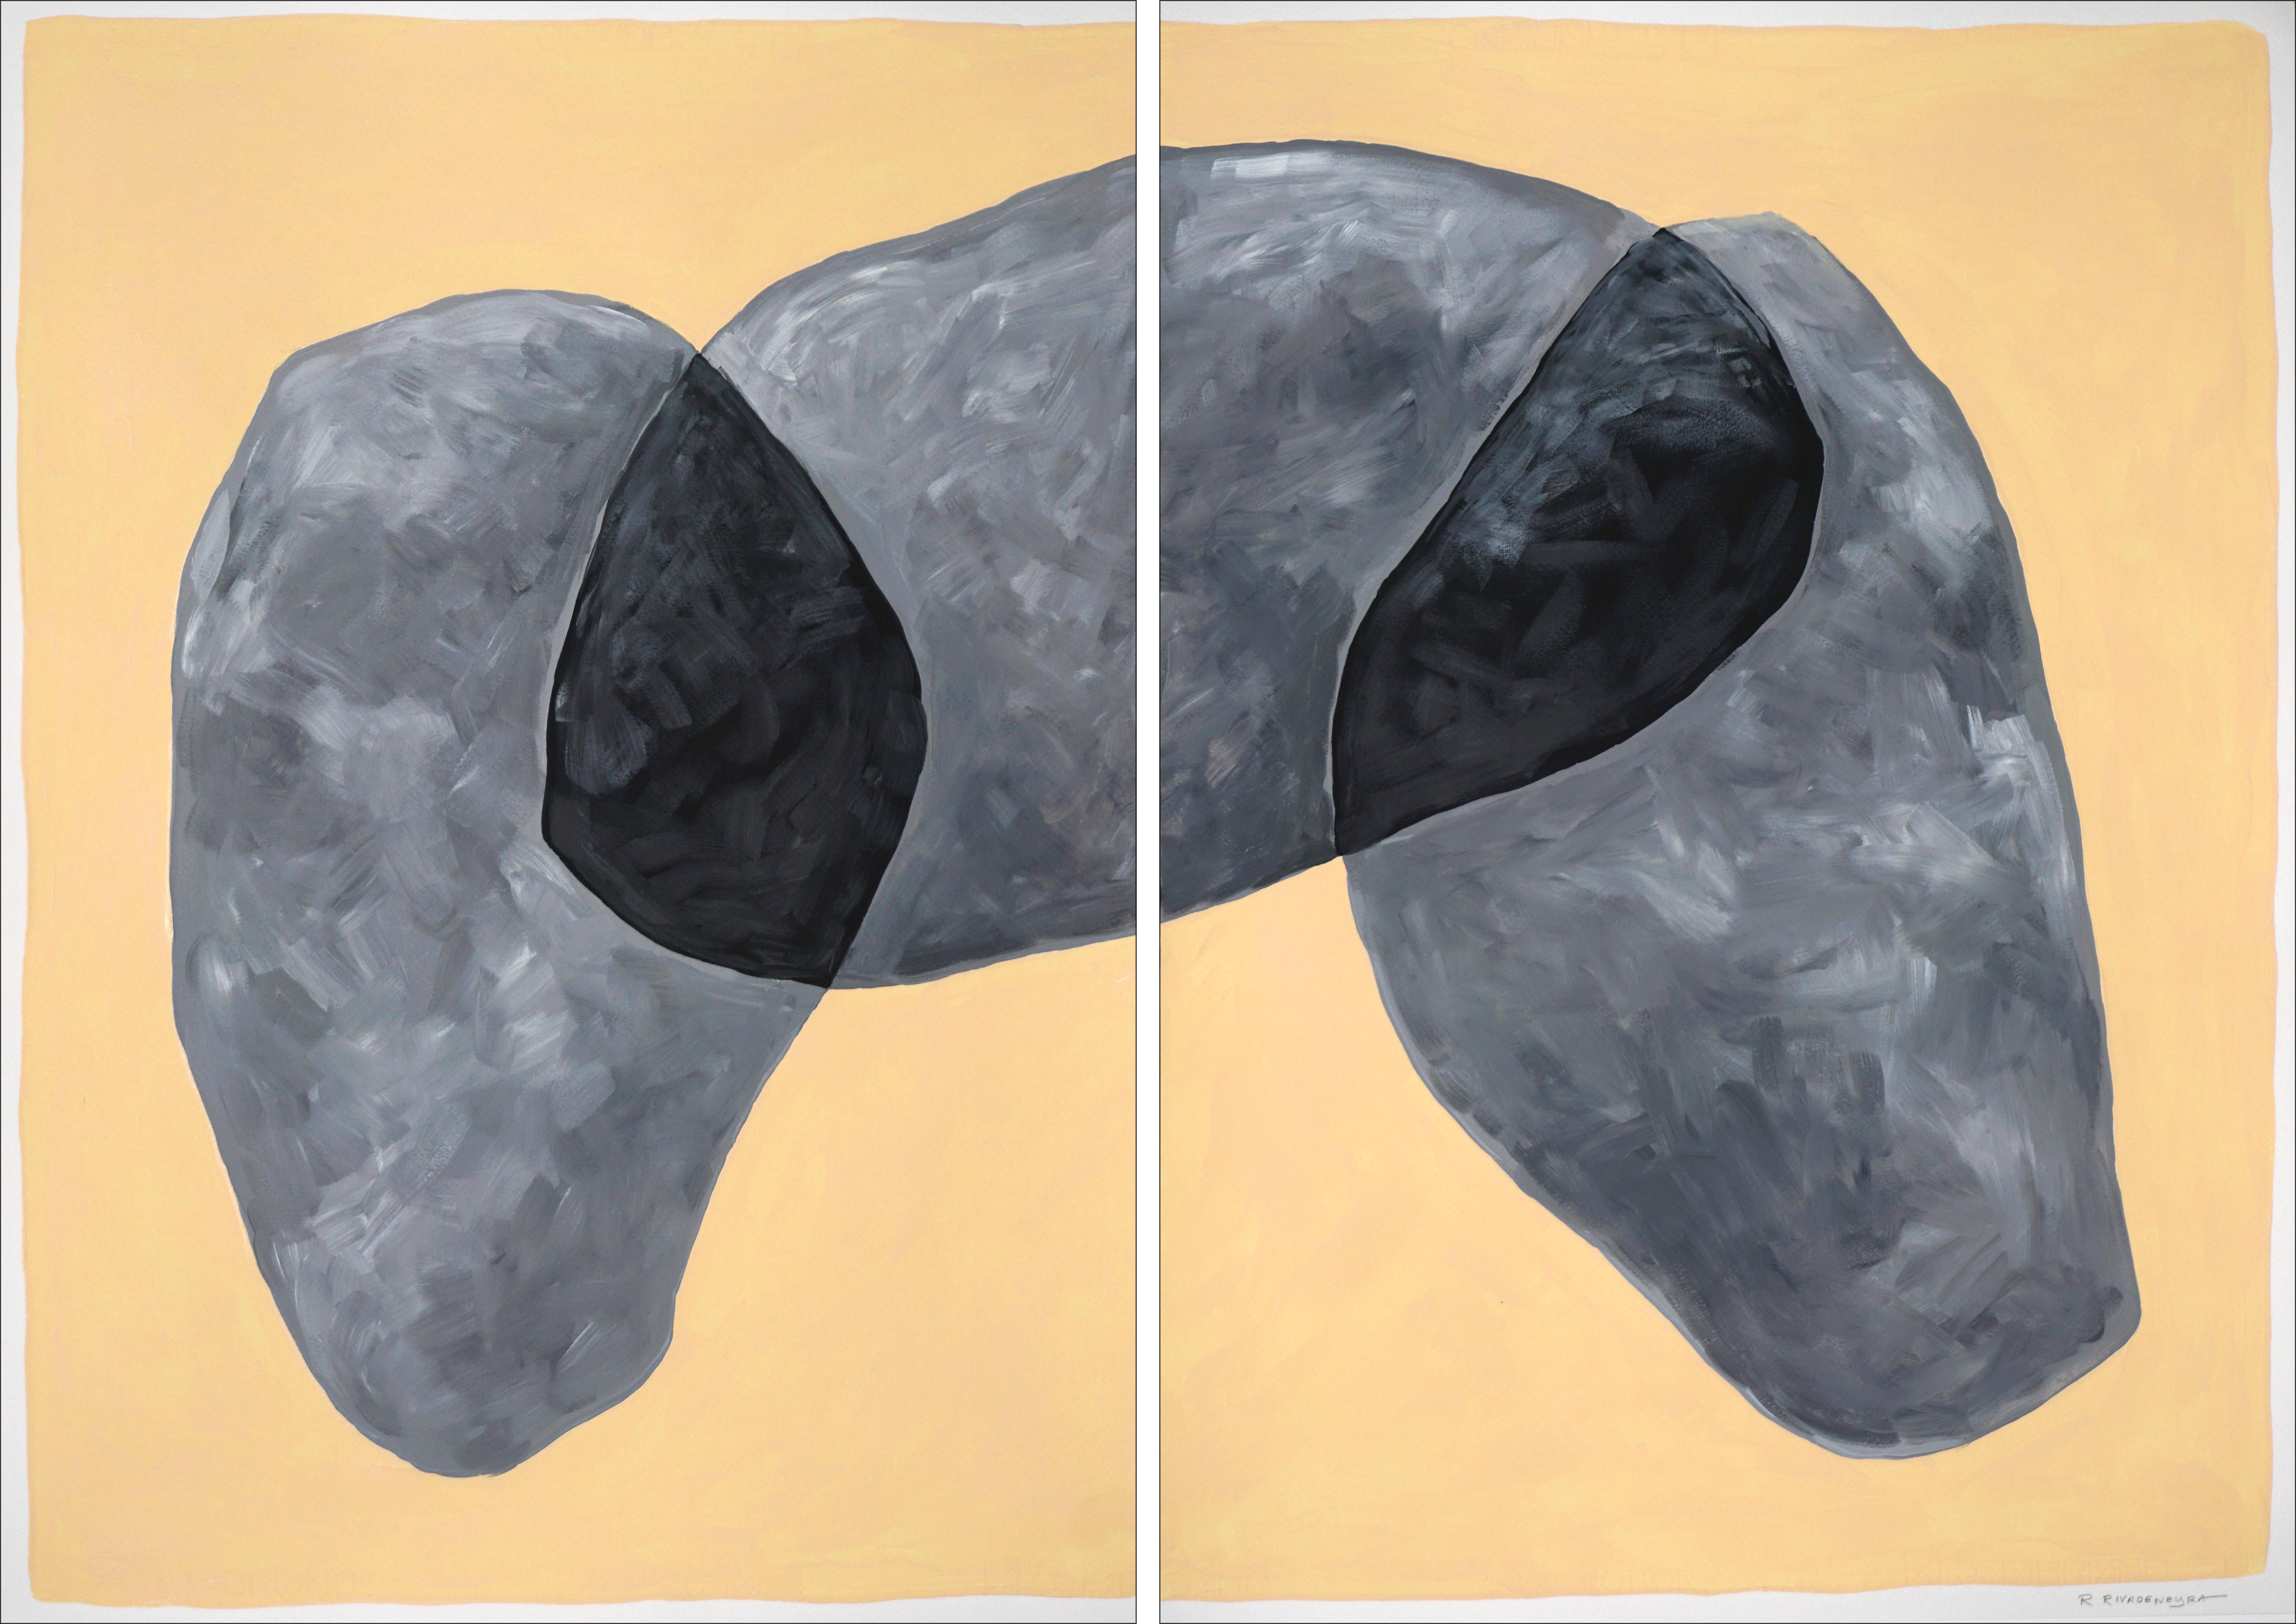 Ryan Rivadeneyra Abstract Painting - Dolmen Boulders, Abstract Diptych on Gray Tones, Tan Background, Geology Shapes